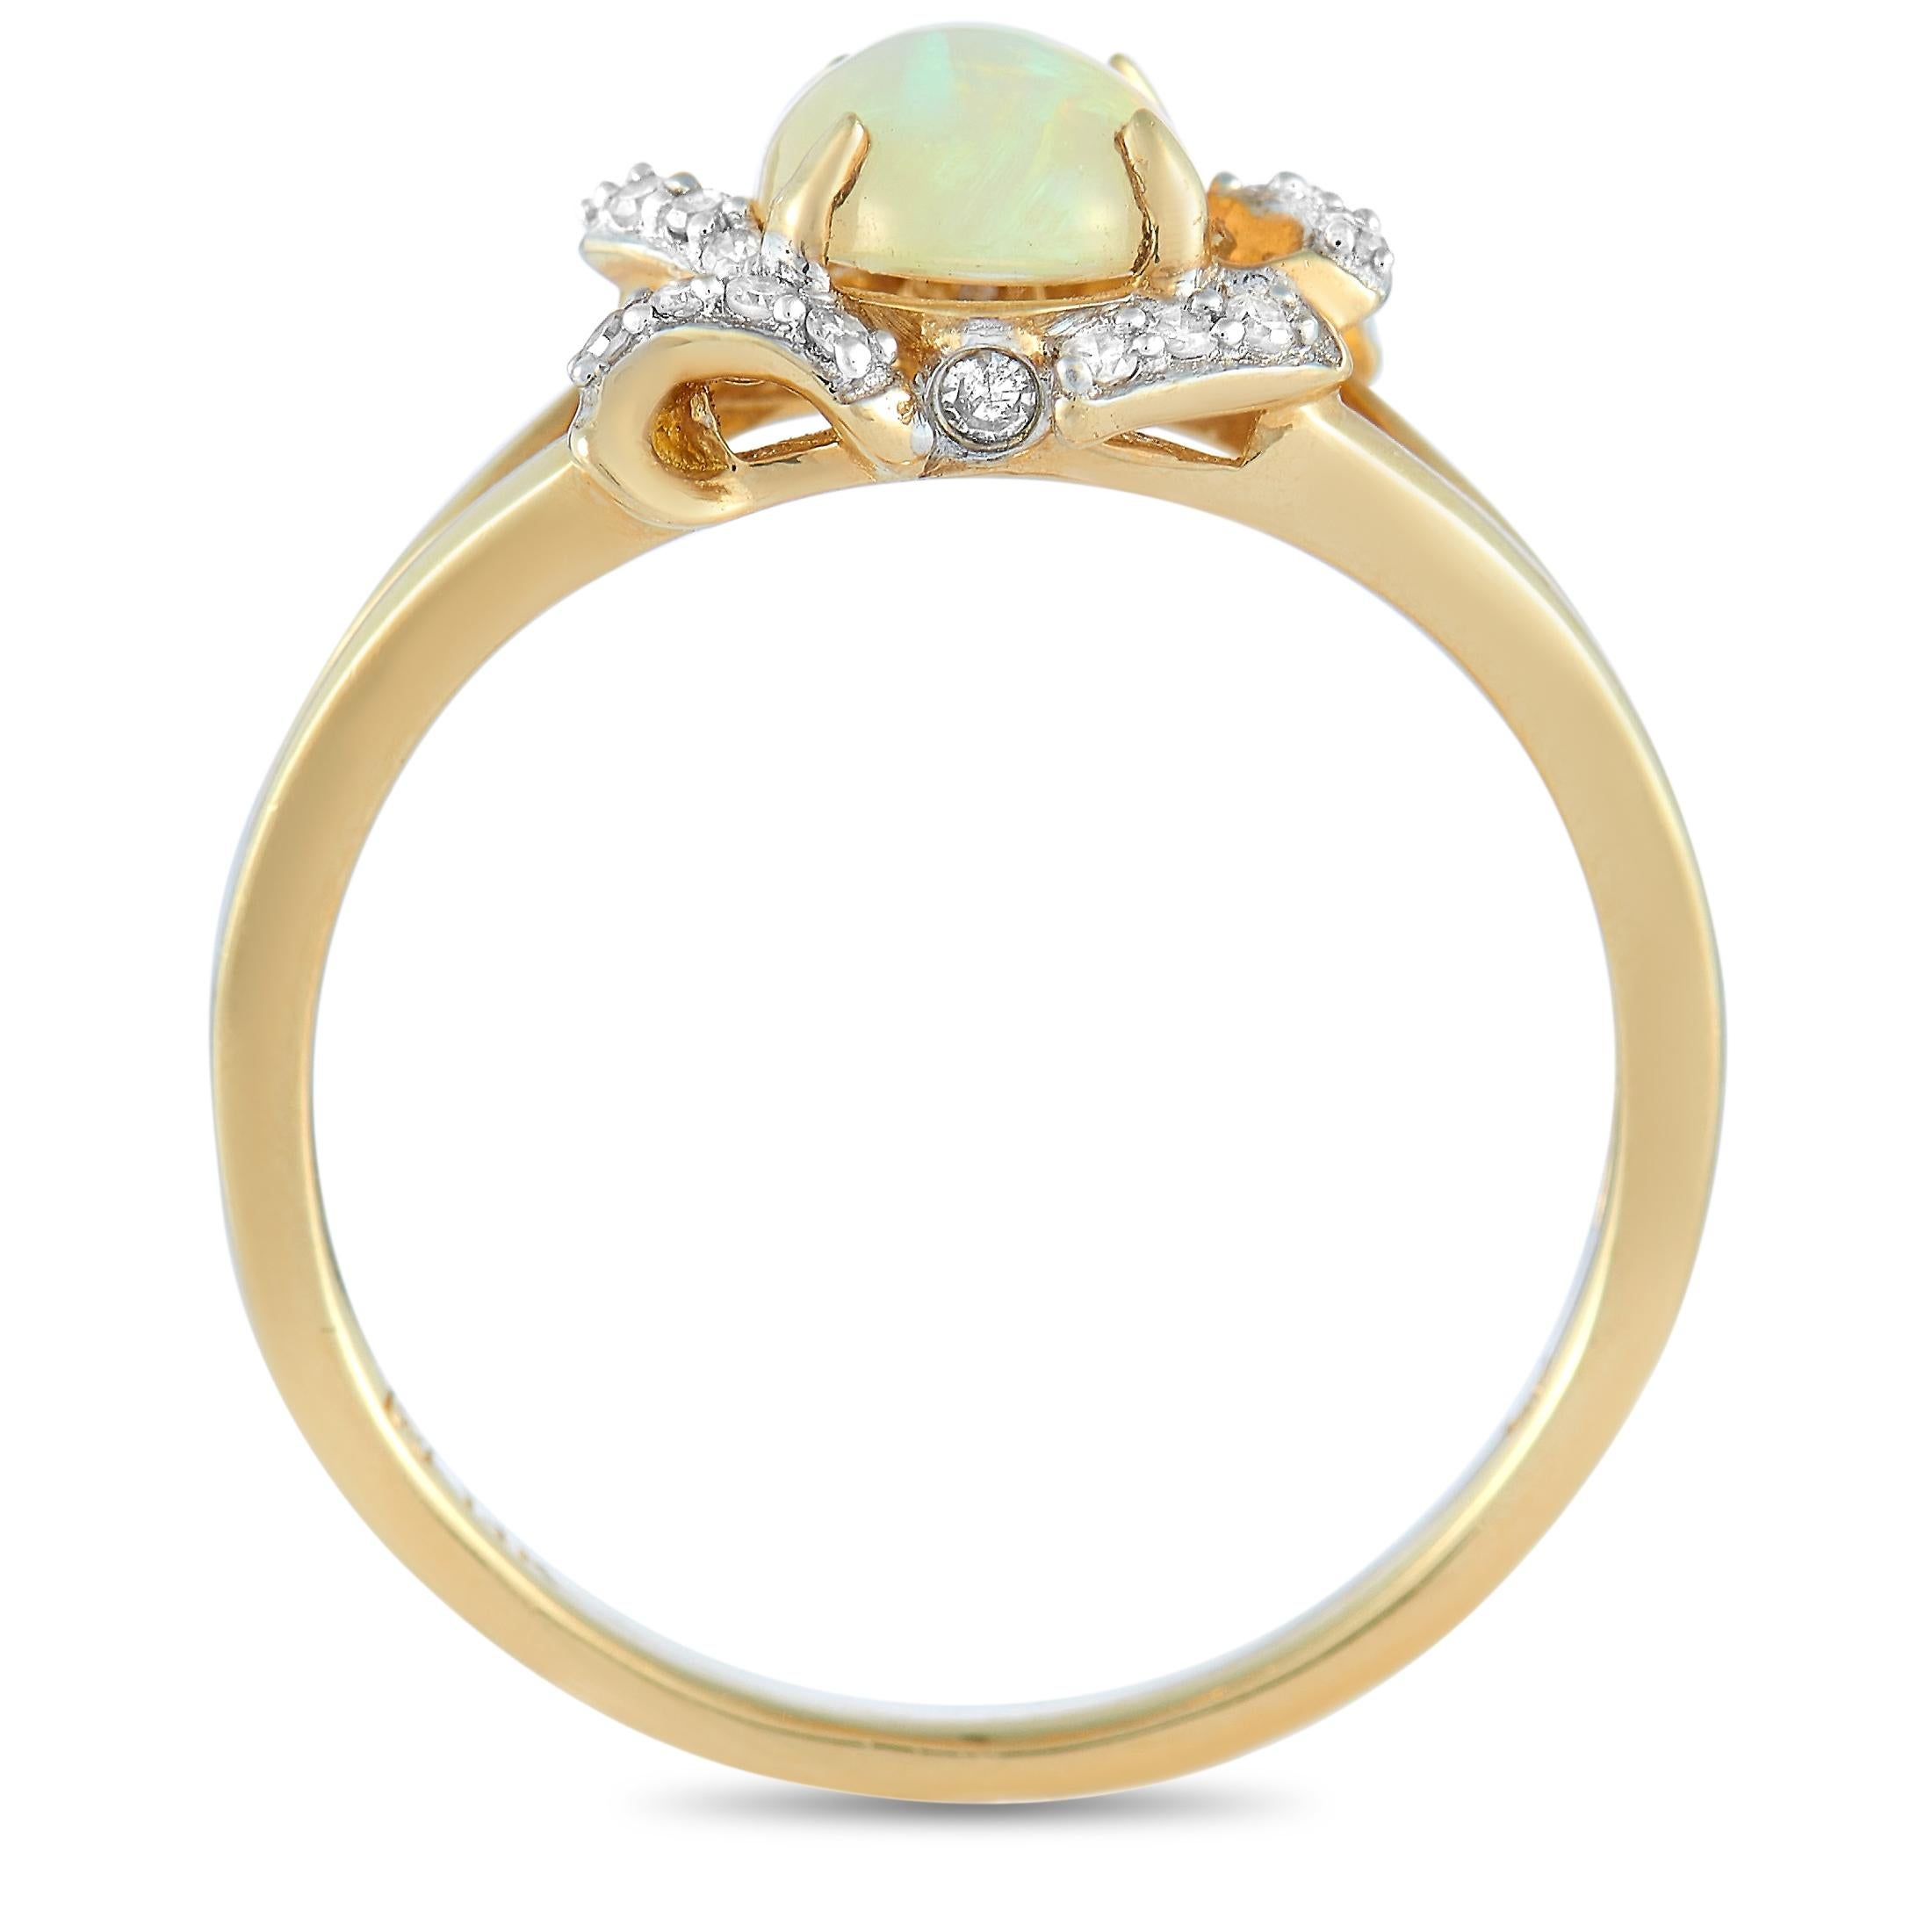 This LB Exclusive ring is crafted from 14K yellow gold and weighs 2.6 grams, boasting band thickness of 2 mm and top height of 5 mm, while top dimensions measure 11 by 8 mm. The ring is set with a 0.85 ct opal and a total of 0.10 carats of